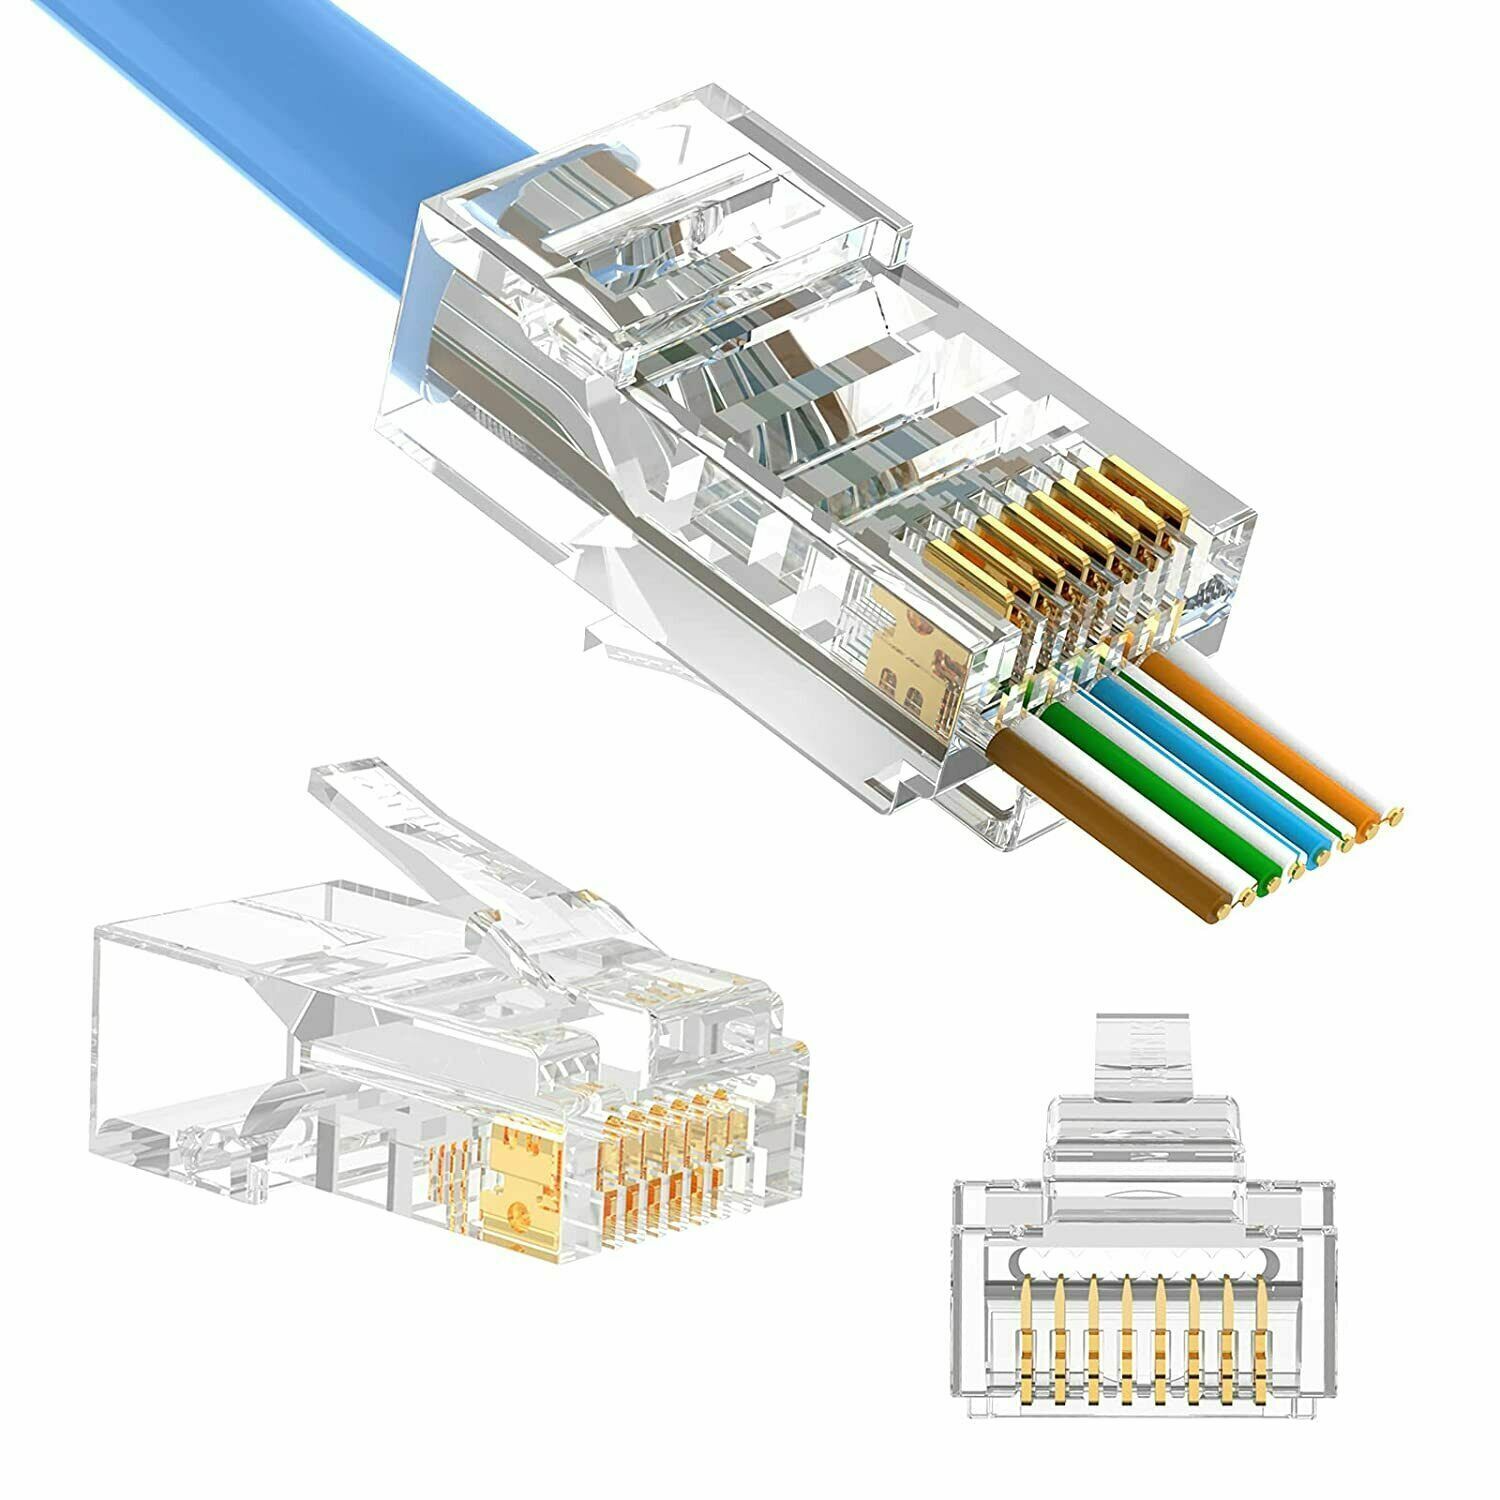 25Pc RJ45 Pass Through Modular Plug Network Cable Connector End - Click Image to Close